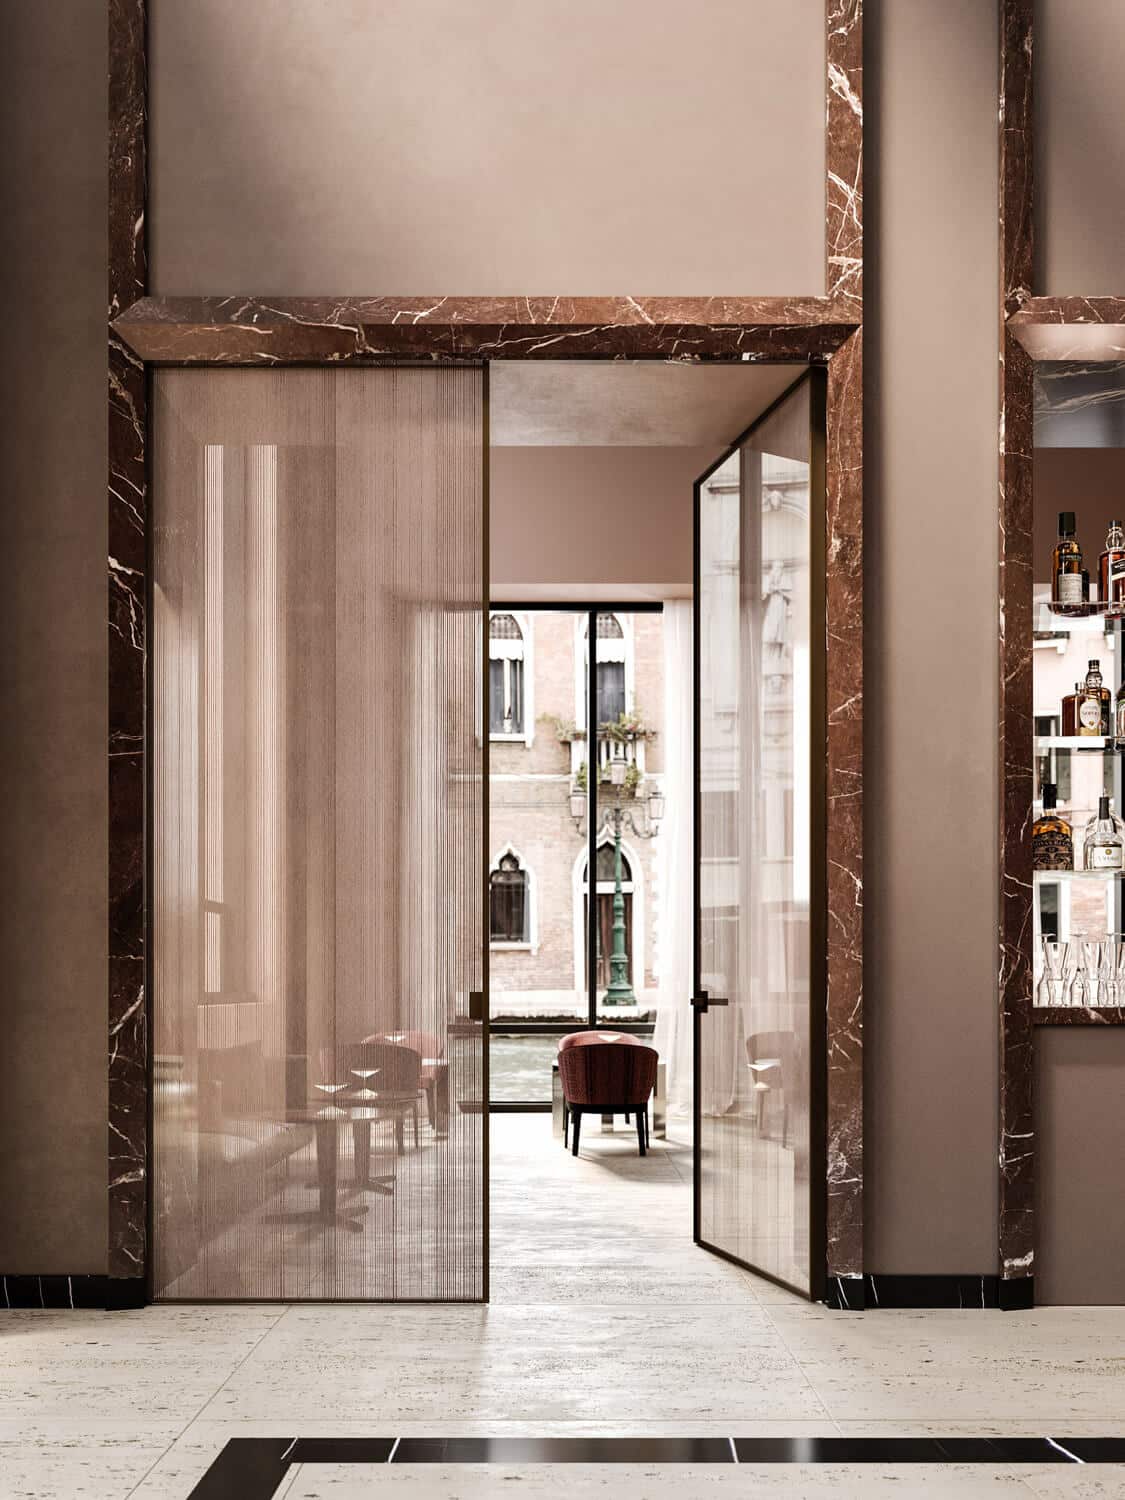 An expression of pure luxury and refined craftsmanship, the Manhattan interior doors integrate easily within the architecture of the home, elevating the quality of the space.